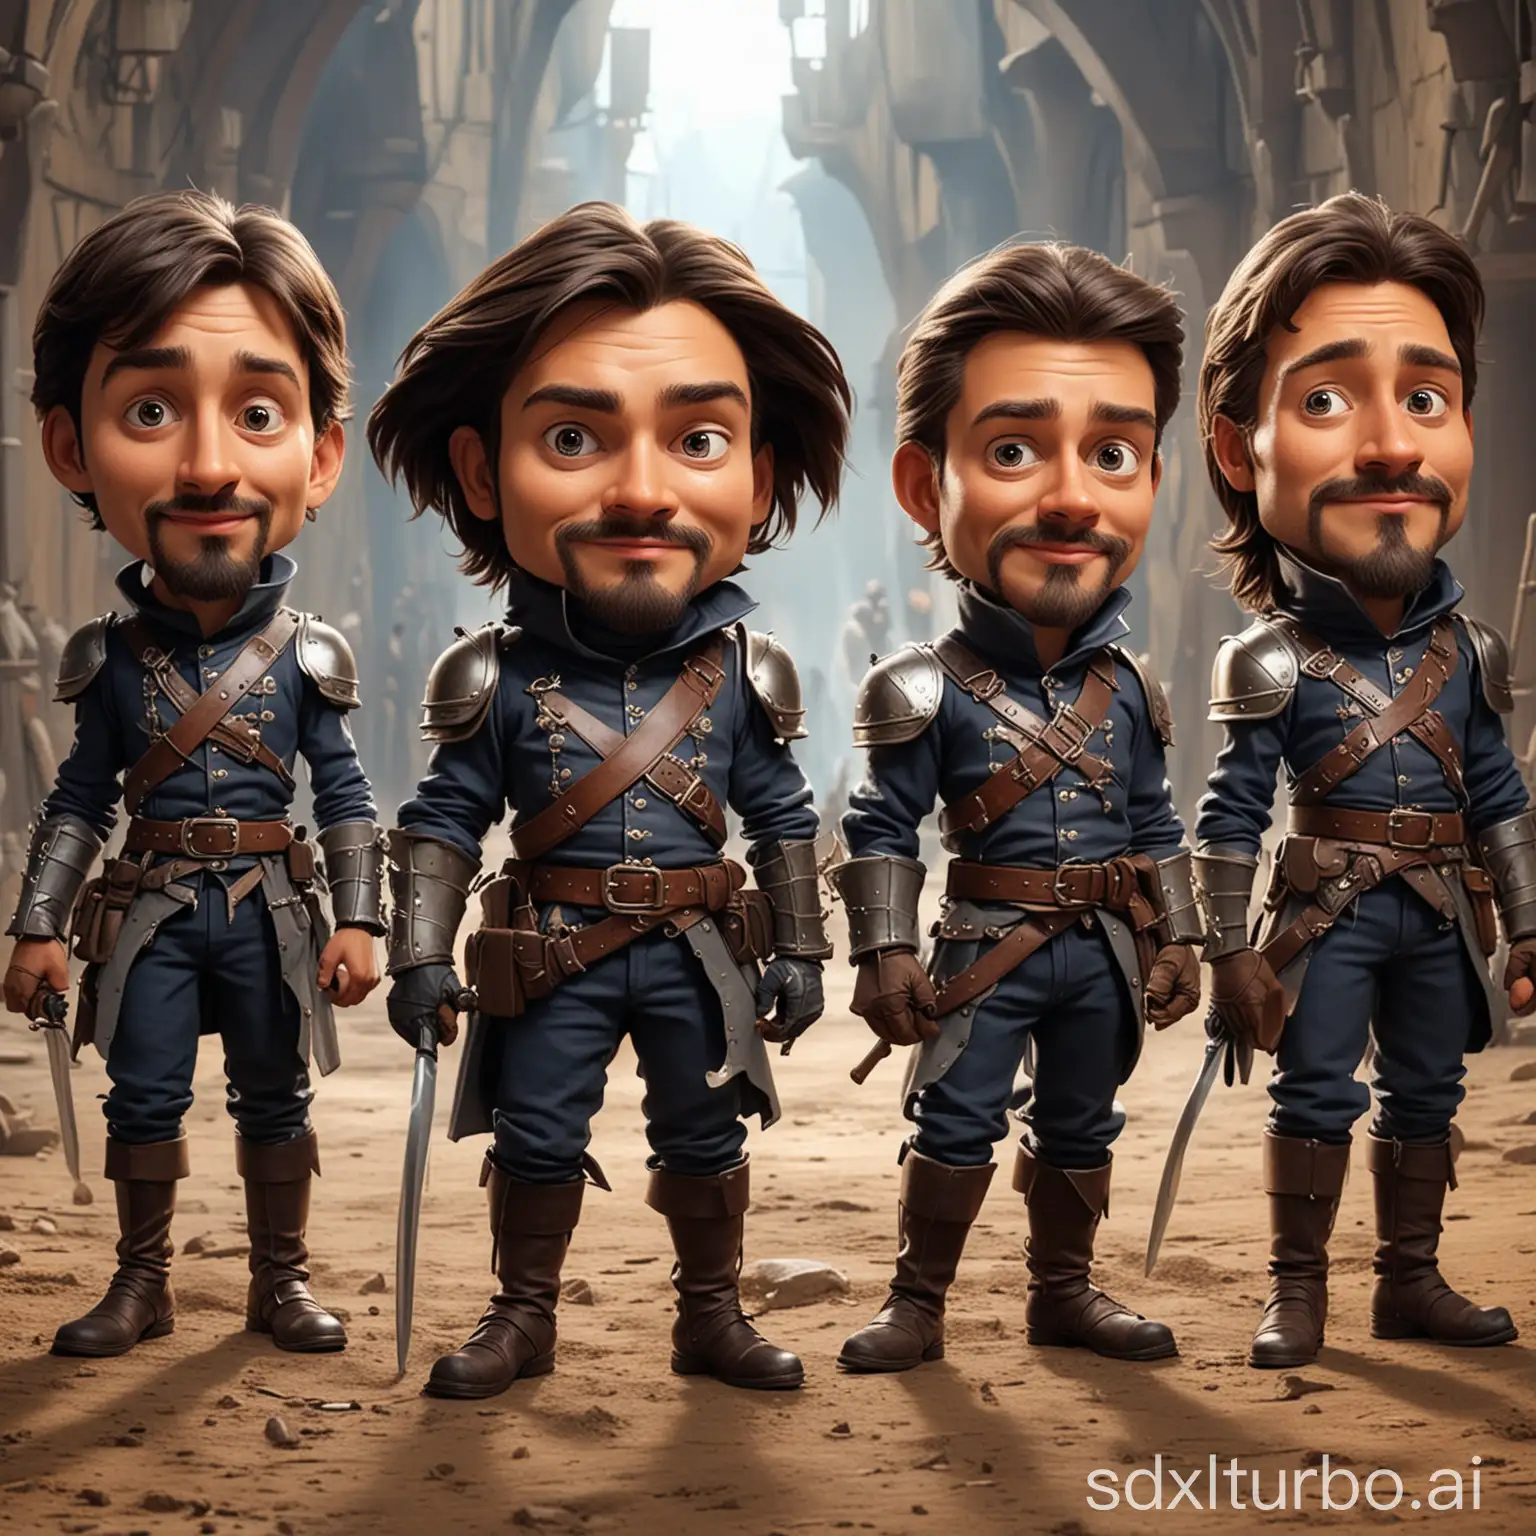 head to toe cartoon caricature of the Musketeers (((without mask))) in futuristic Musketeers costume, exageration, big head caricature style, full body view, movie scene film background, high quality, best quality